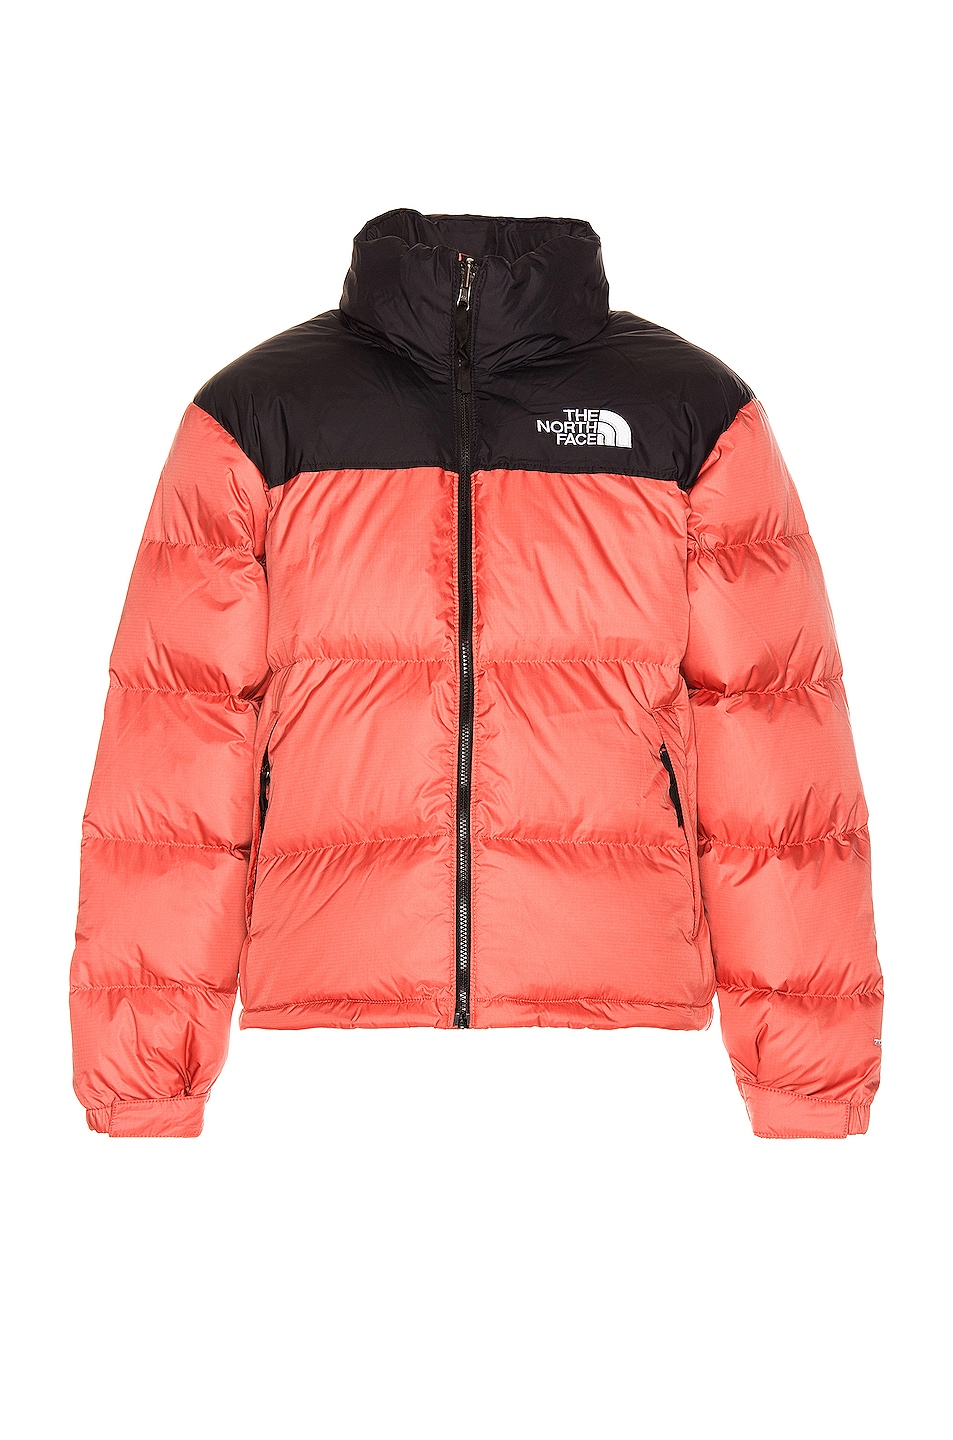 Image 1 of The North Face 1996 Retro Nuptse Jacket in Faded Rose